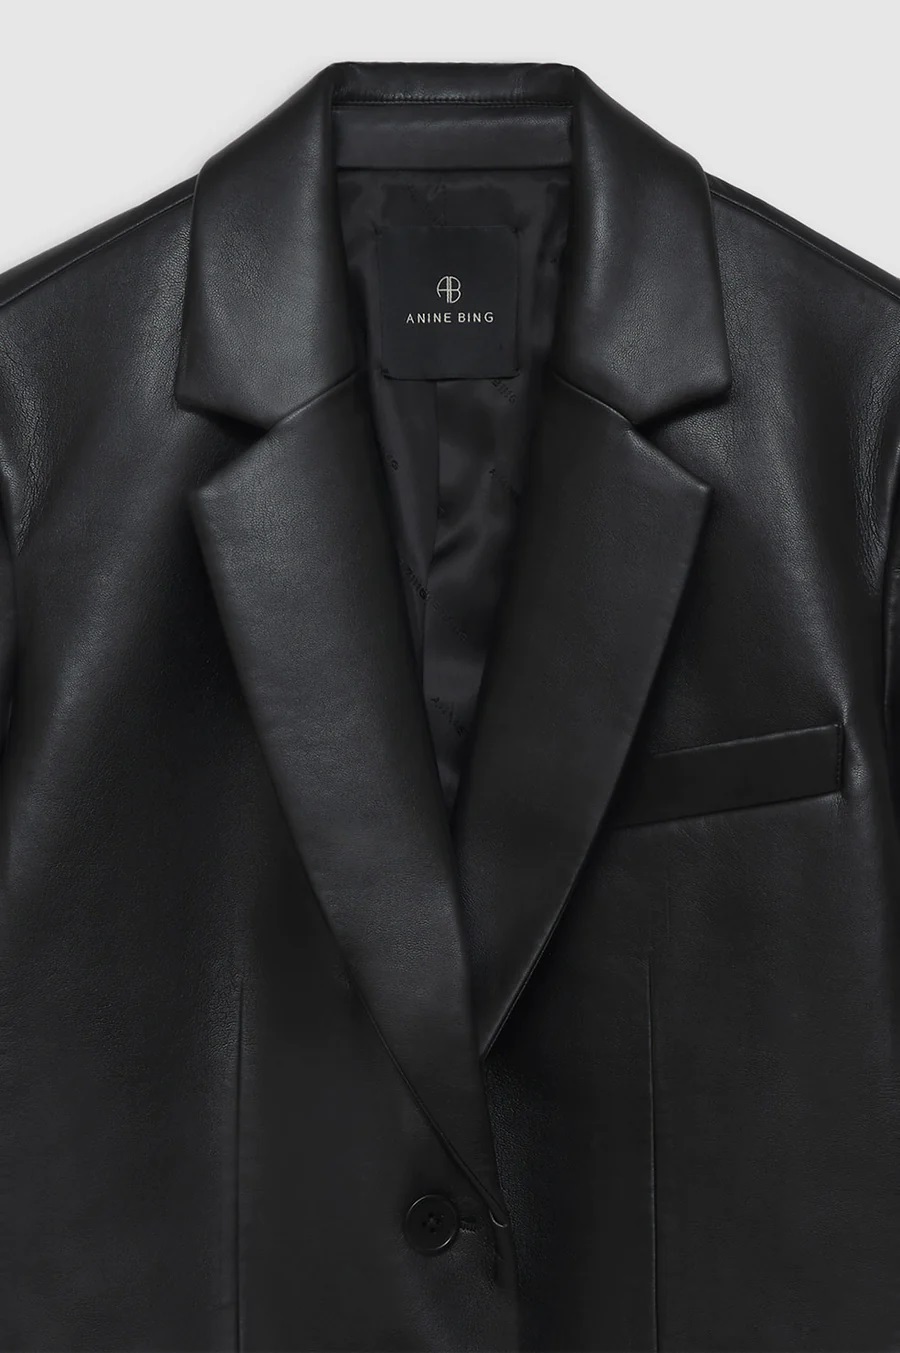 ANINE BING Classic Blazer in Black Recycled Leather